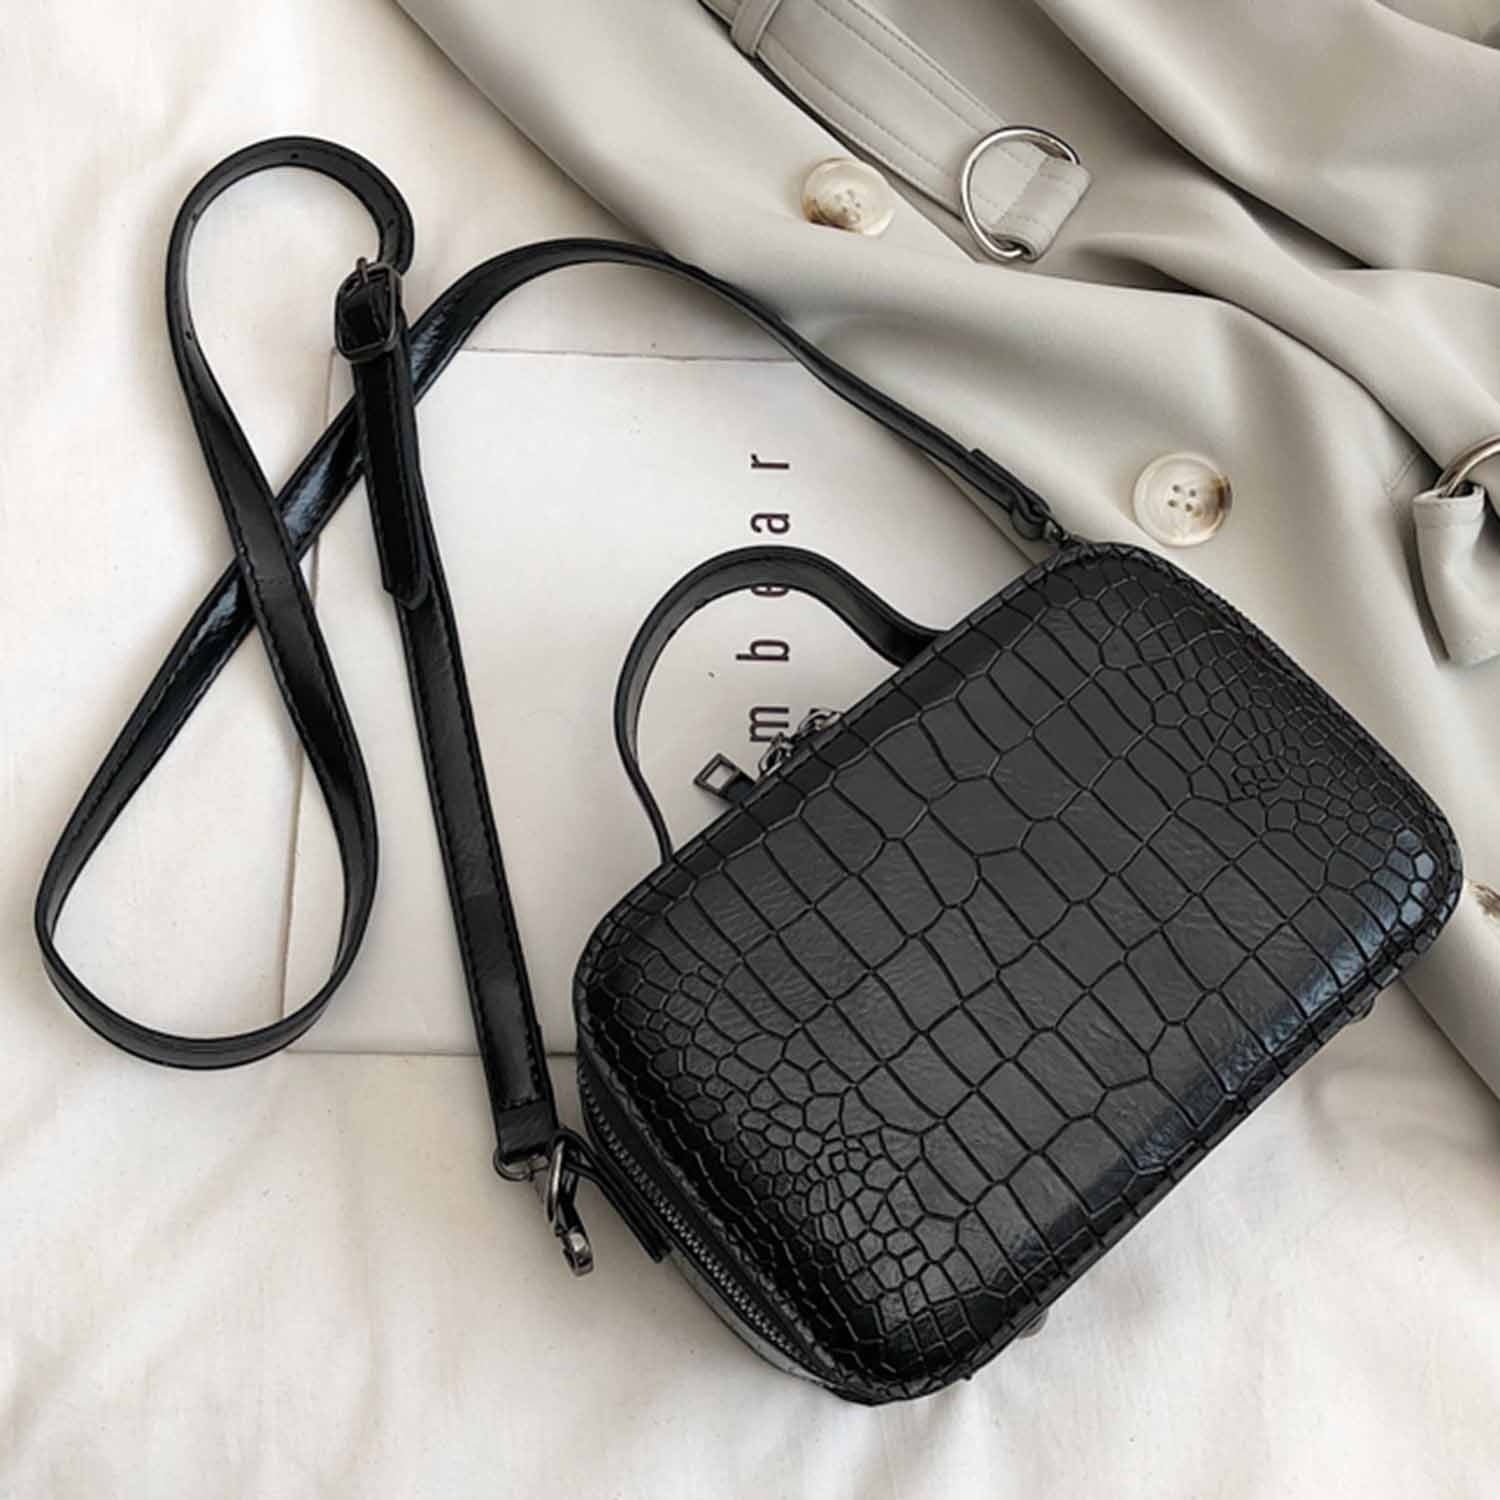 Stone Pattern Crossbody Bags For Women Fashion Small Solid Colors Shoulder Bag Female Handbags And Purses With Handle(Bla - ebowsos